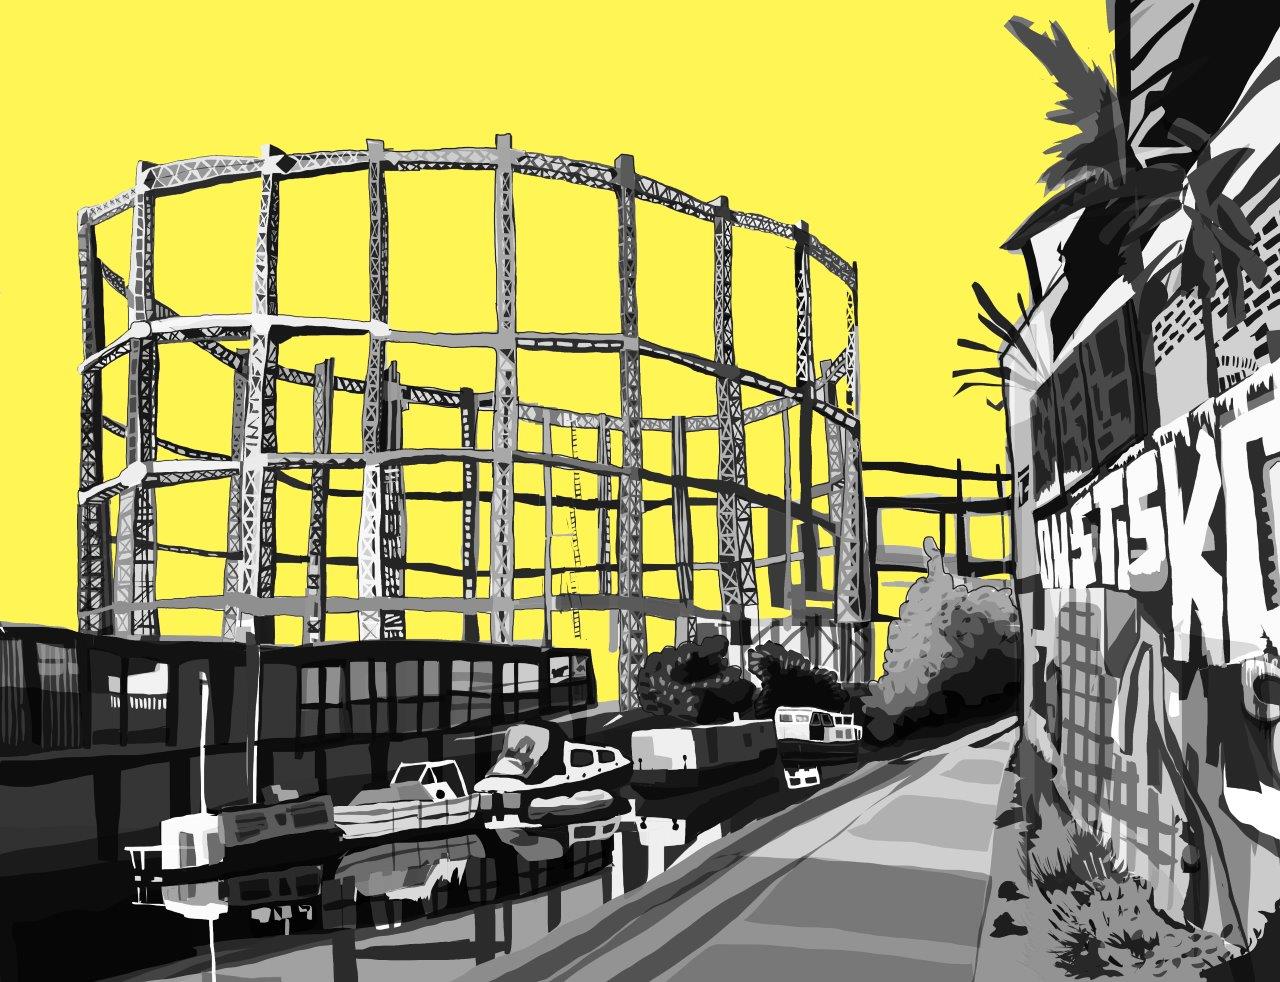 Bethnal Green Gas Holders (Yellow) - tomARTacus